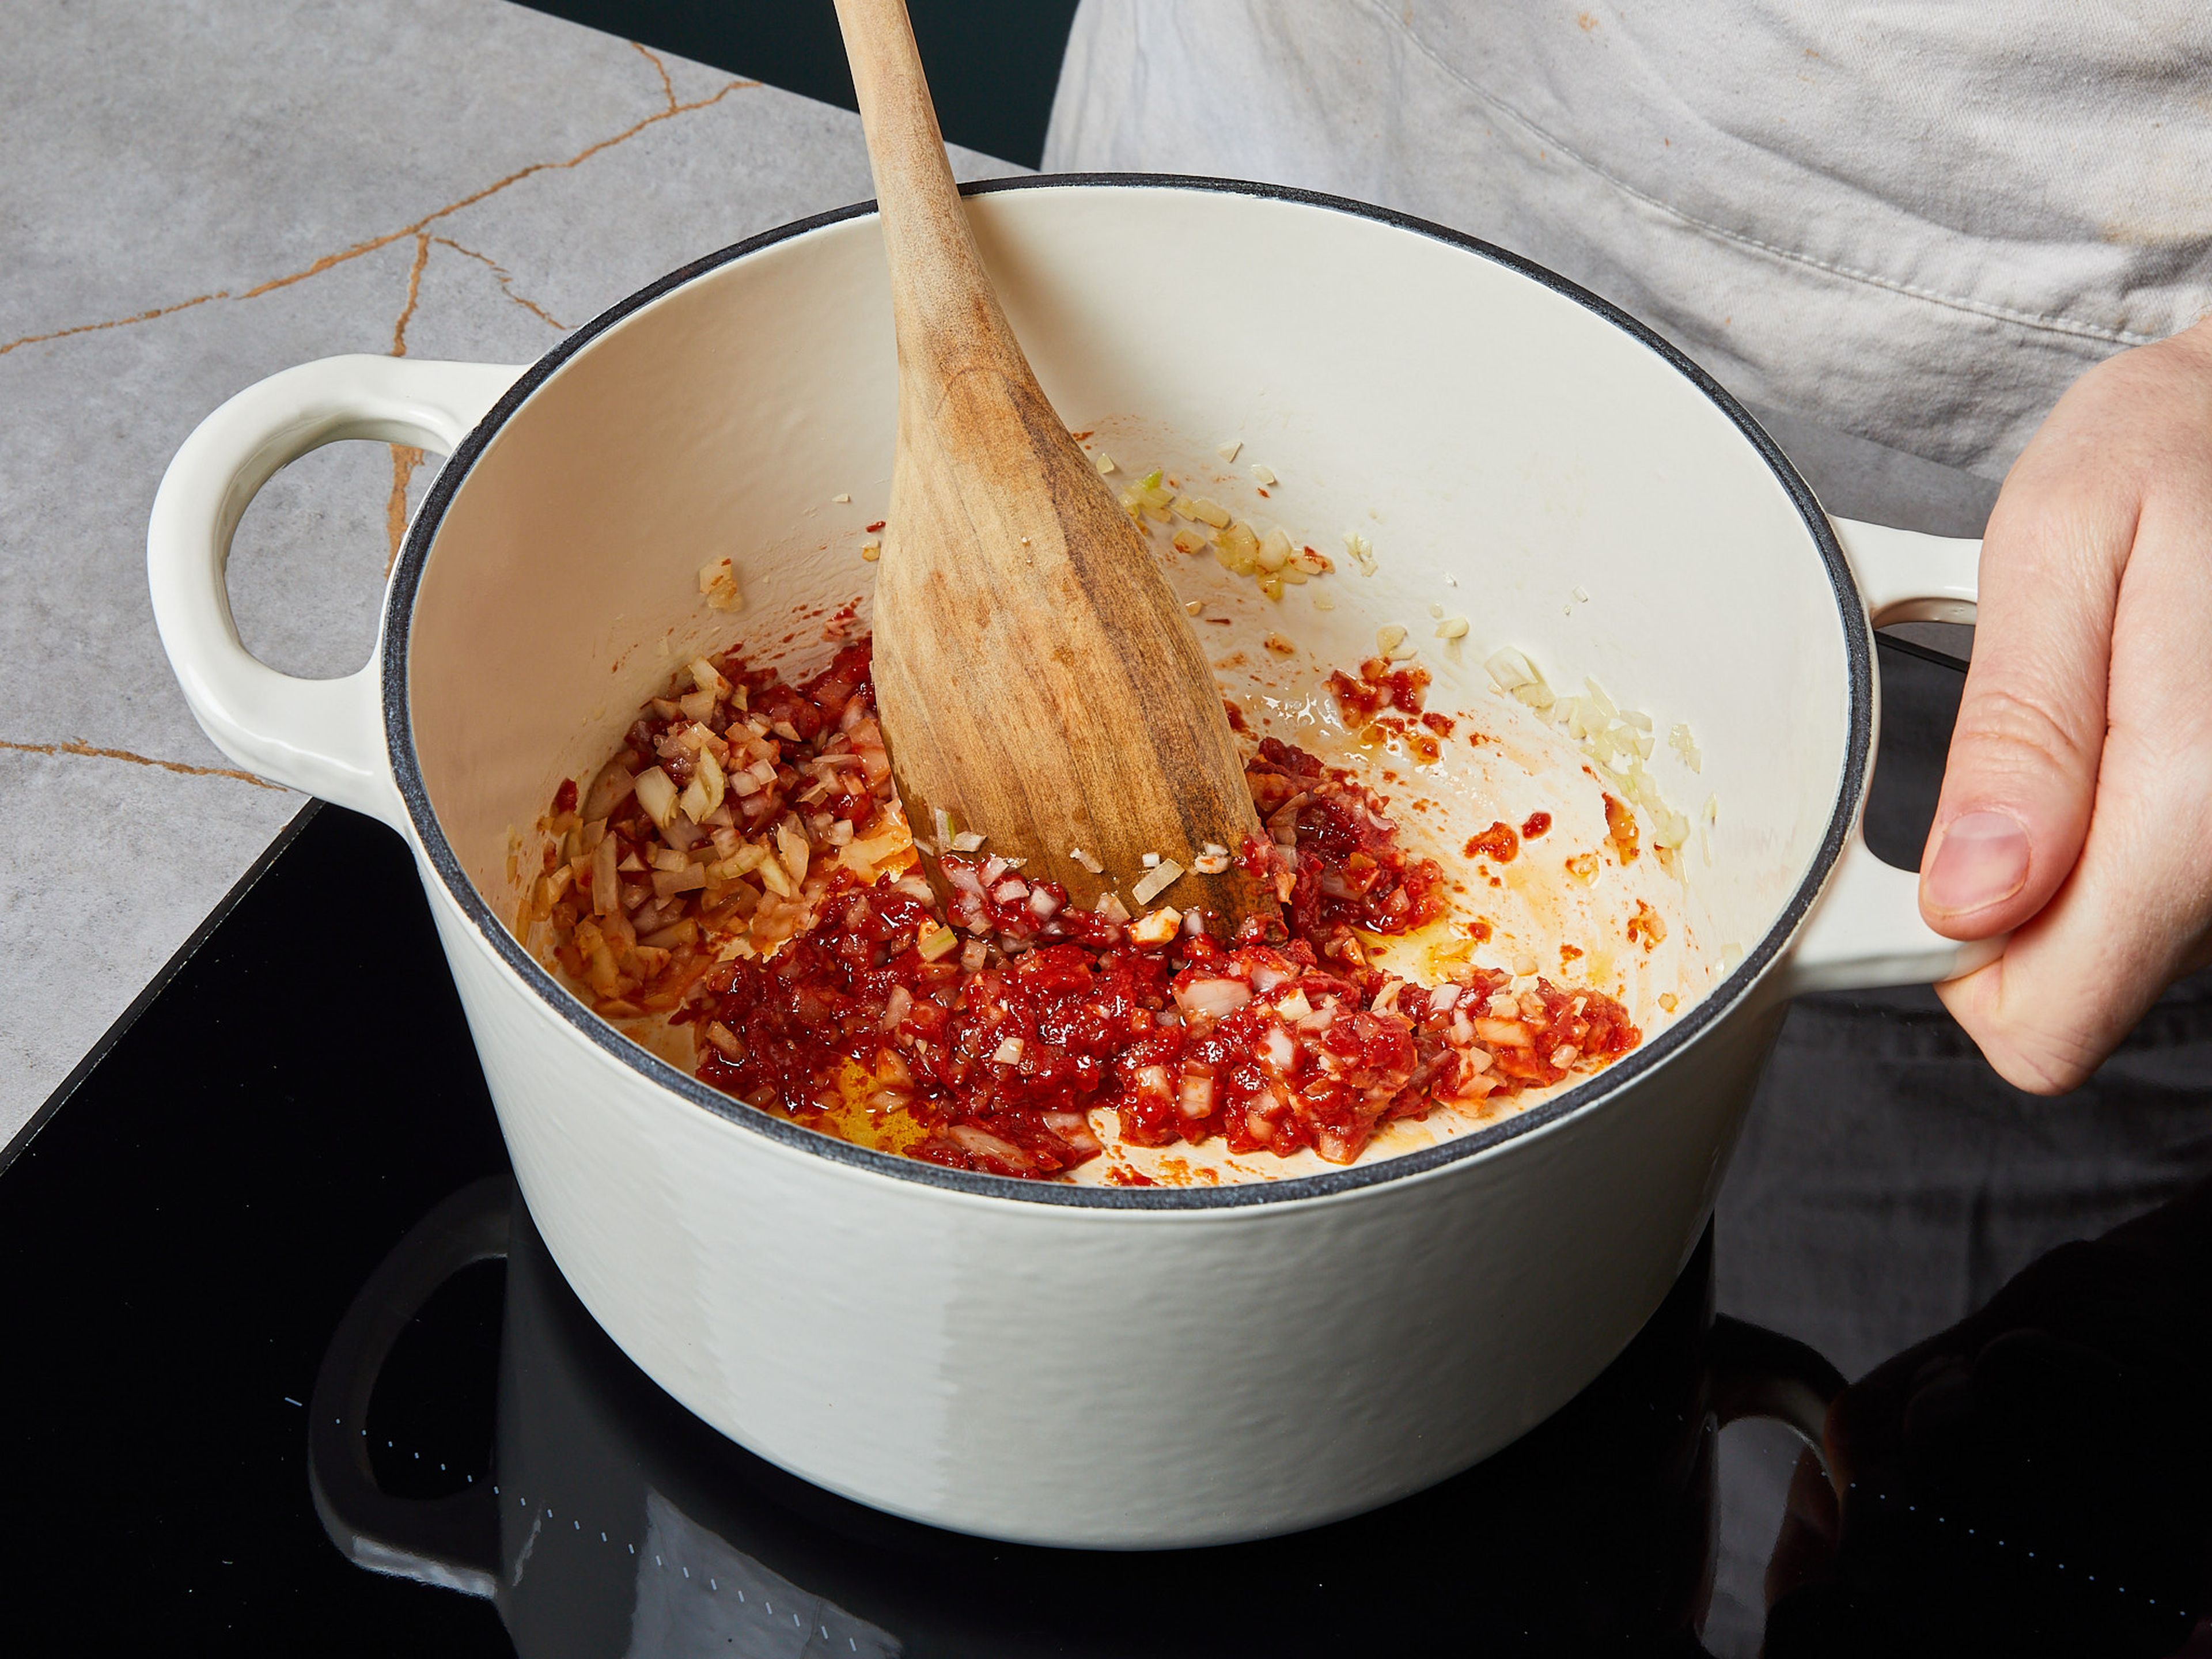 Stir in the tomato paste. Then, add the vegetable stock and crushed tomatoes.